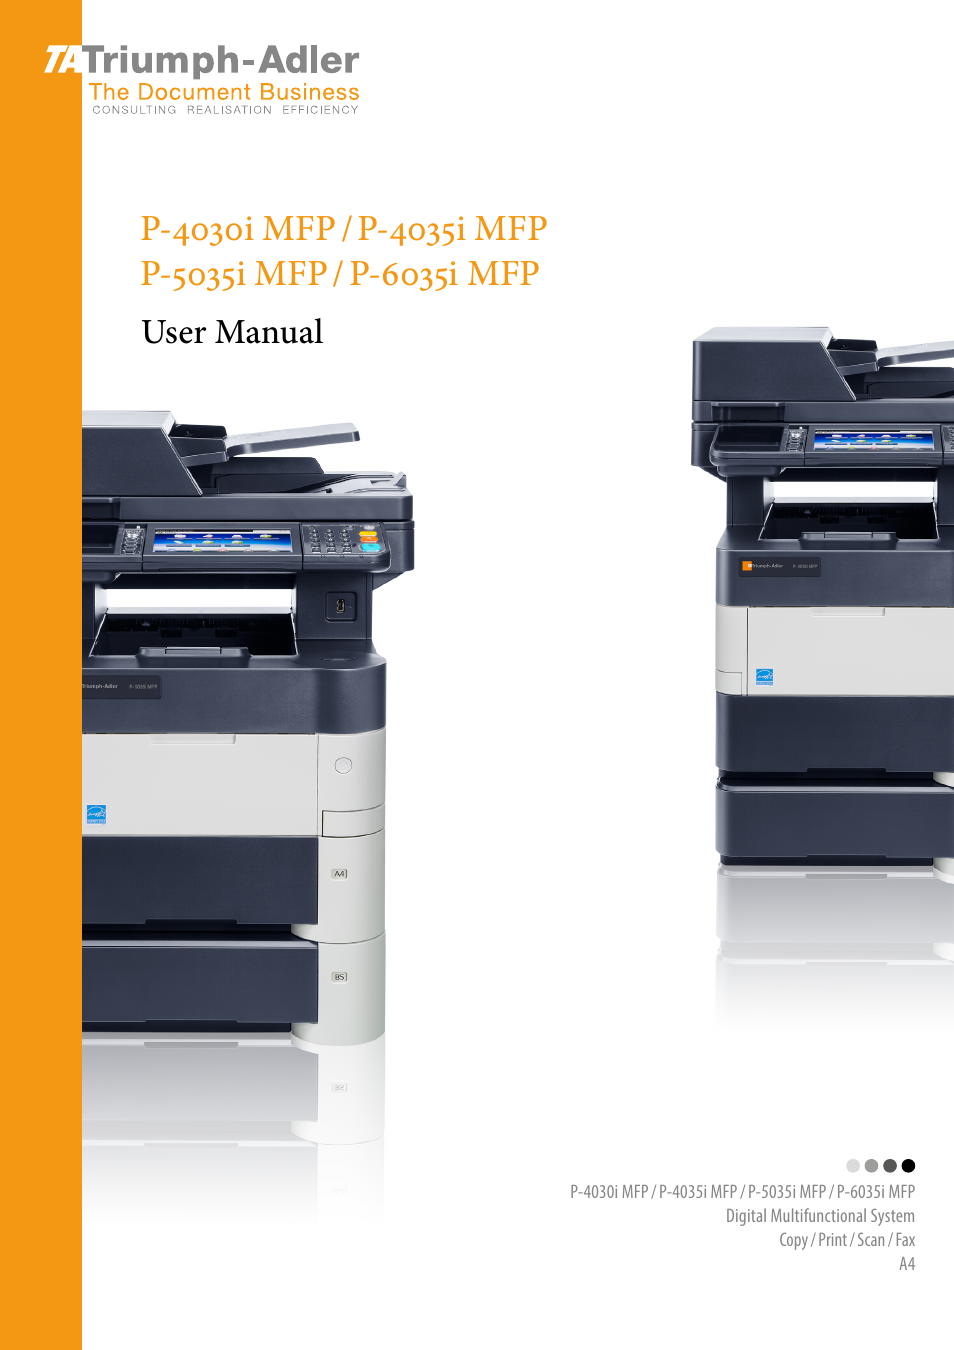 TA Triumph-Adler P-4030i MFP User Manual | 421 pages | Also for: P-4035i  MFP, P-5035i MFP, P-6035i MFP